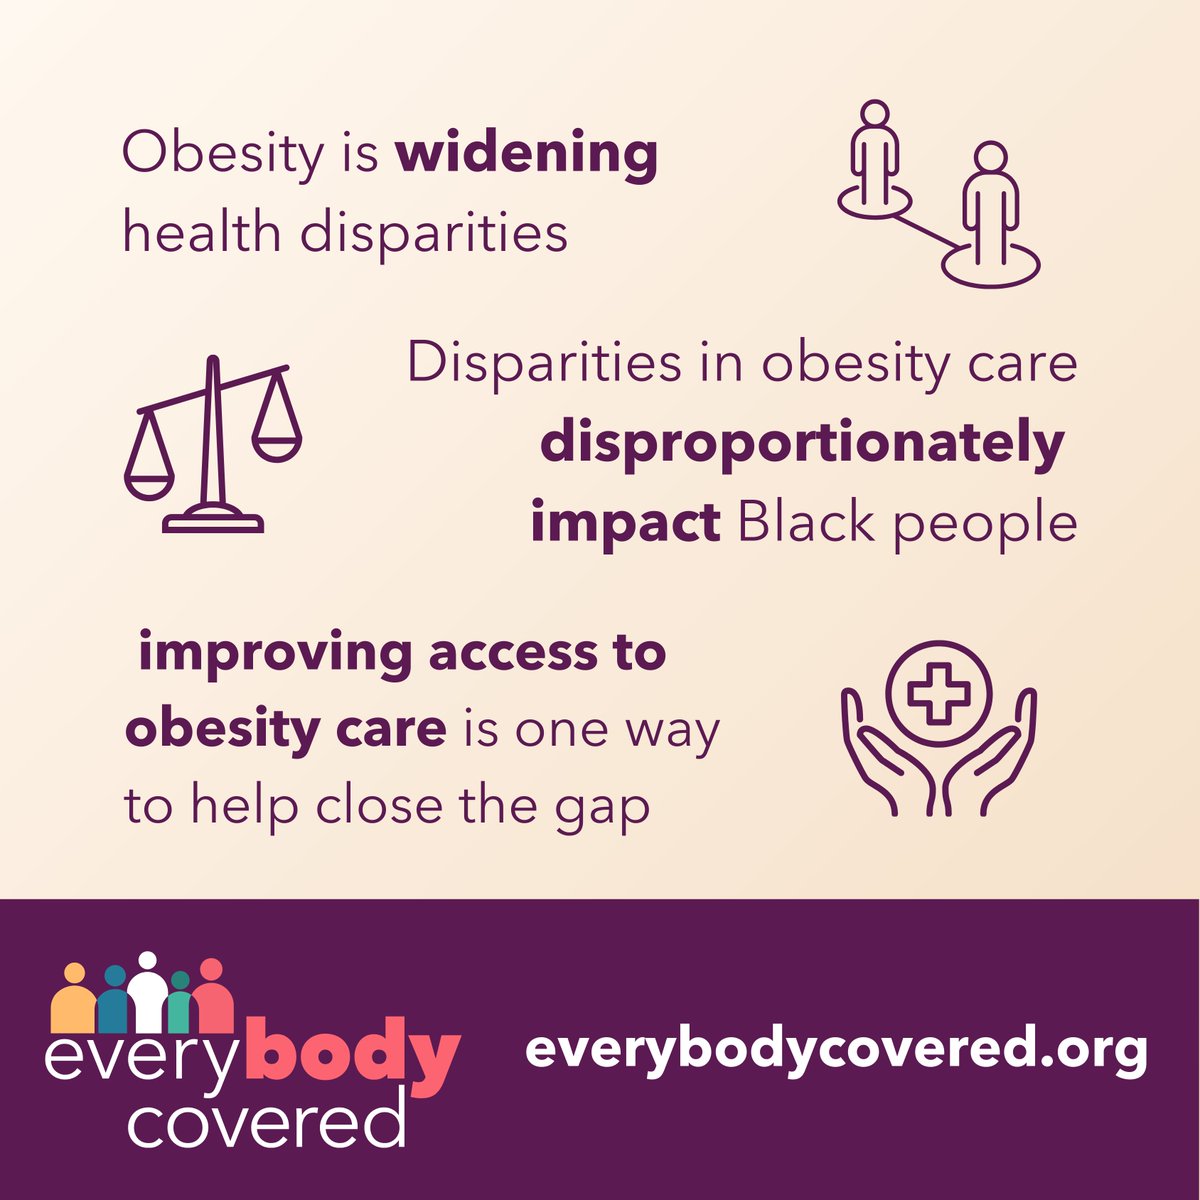 #Obesity not only impacts women, but it particularly impacts women of color. EveryBODY Covered is mobilizing women of diverse backgrounds to share their experiences and advocate for better obesity care coverage. Learn more at everybodycovered.org #everyBODYcovered